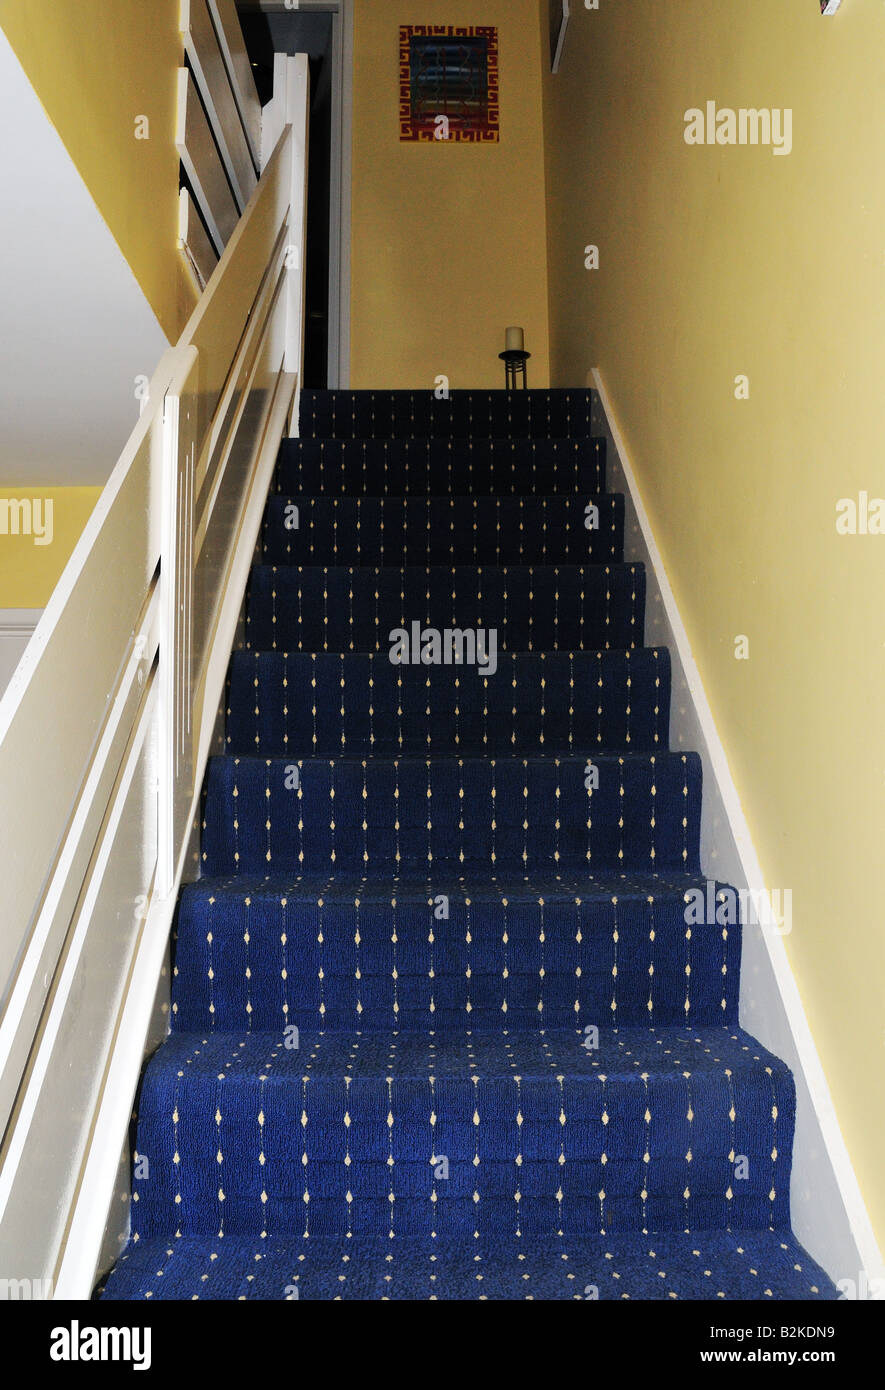 Carpeted stairs in a hallway Stock Photo